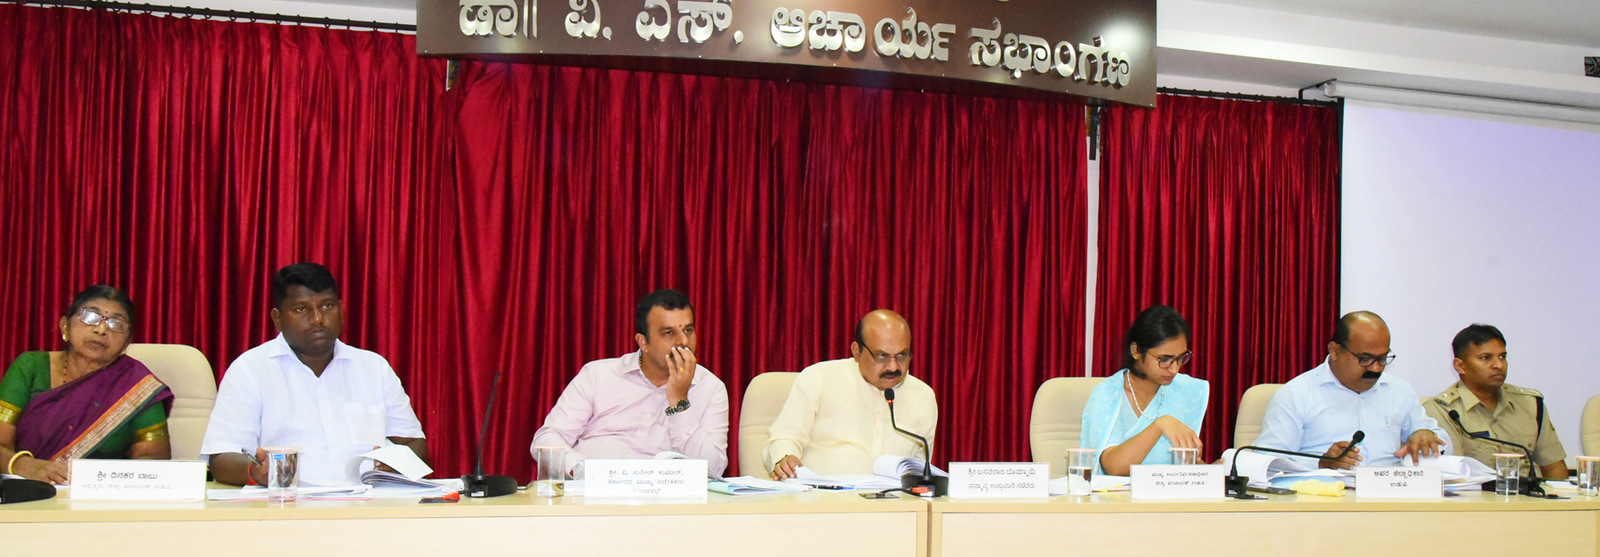 Promising solution for the problems of the district – Basavaraj Bommai, District in-charge Minister